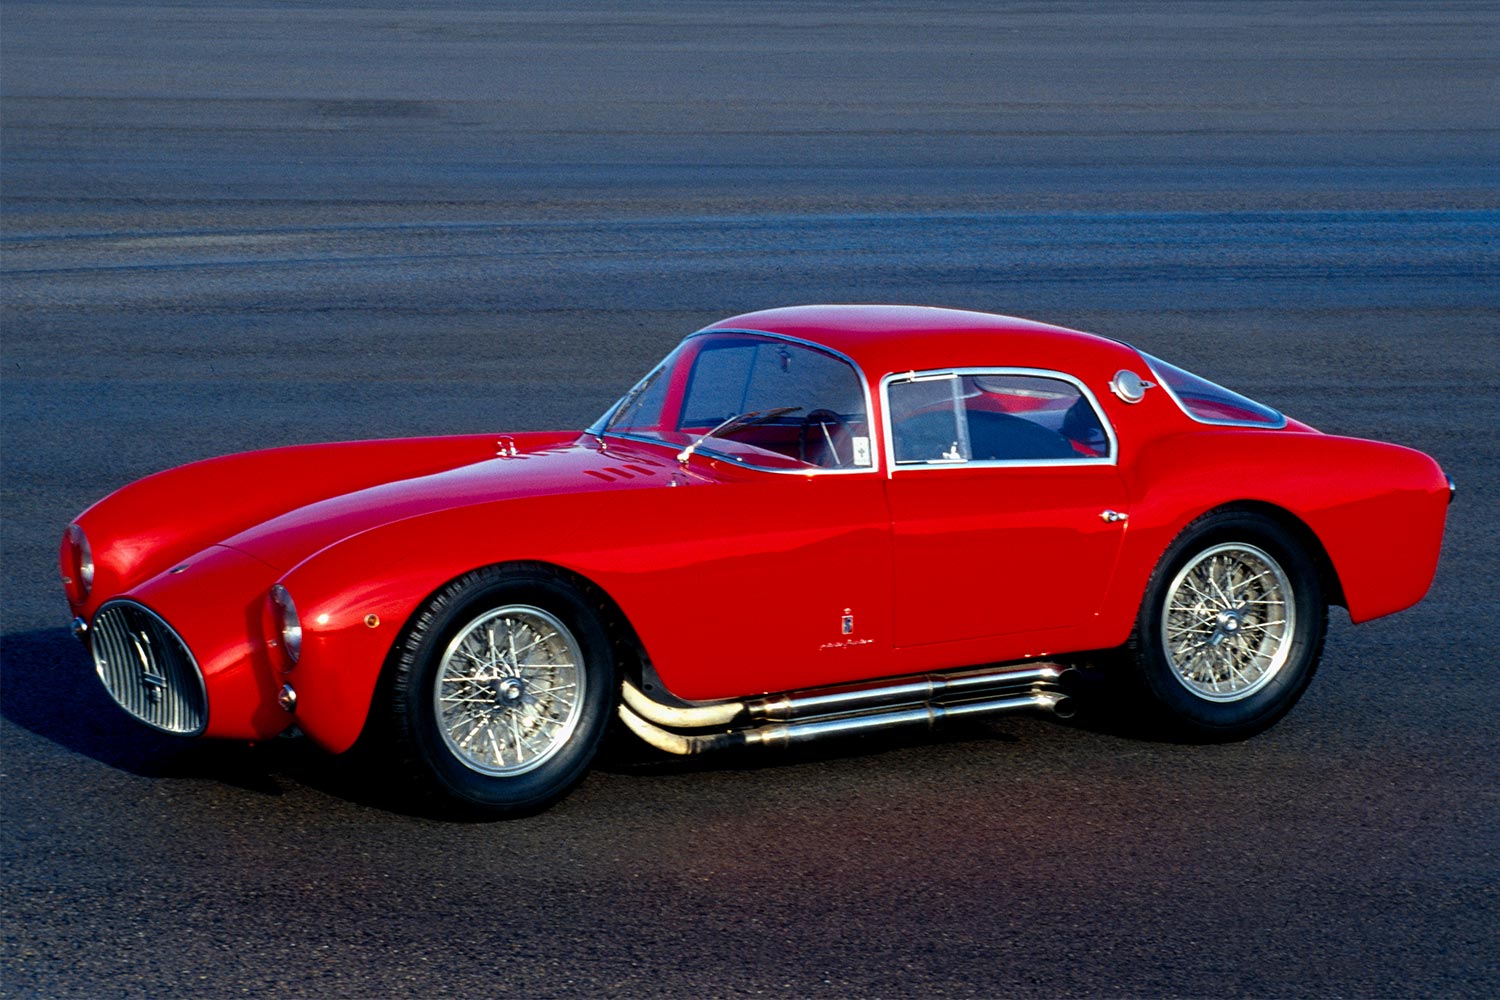 The Maserati A6GCS Berlinetta, one of the inspirations for the MC20.